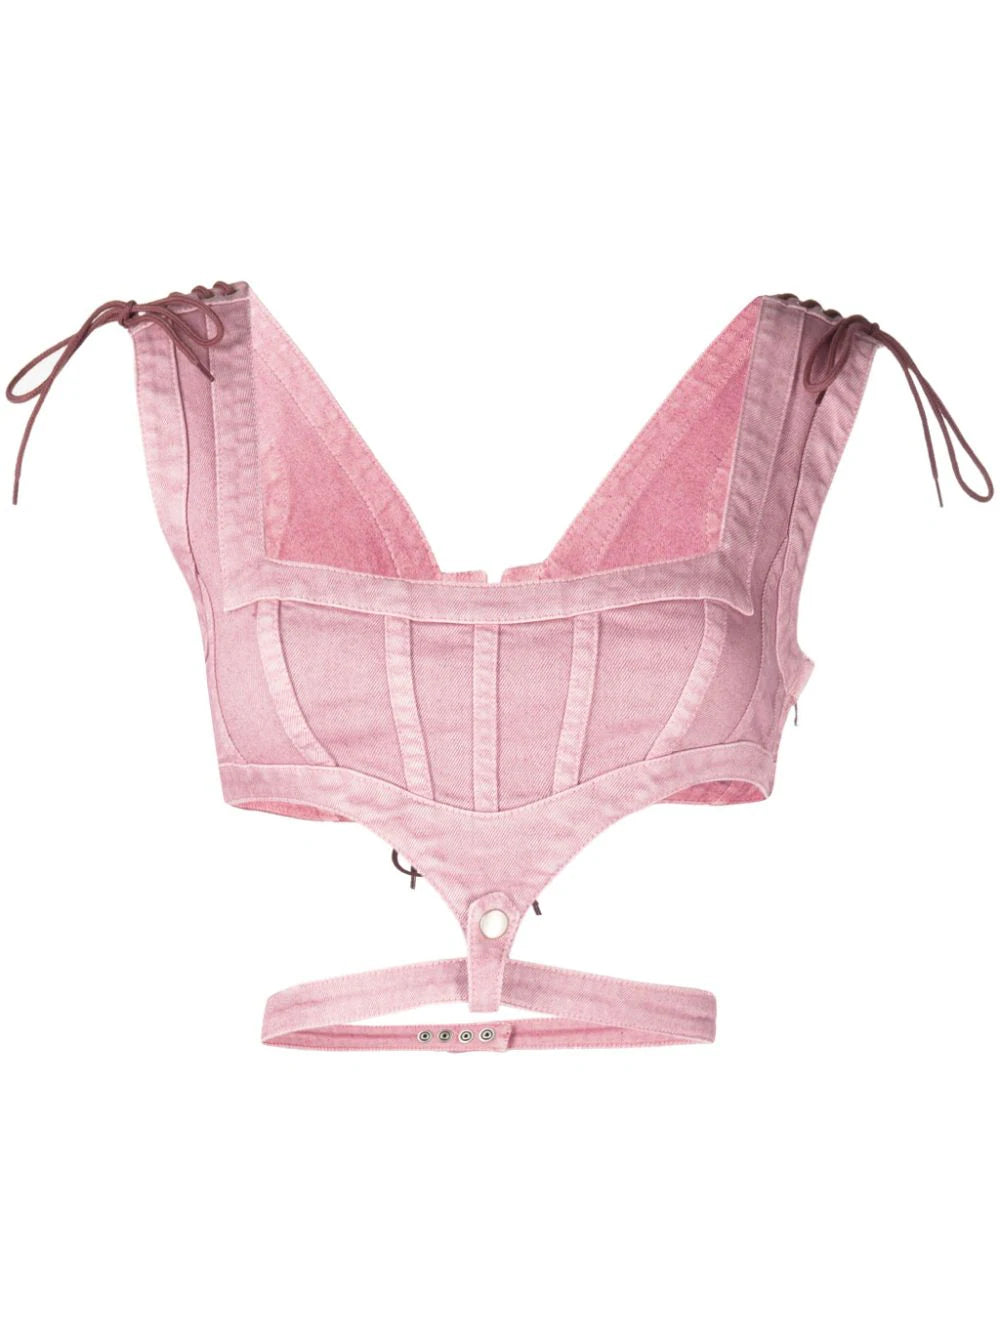 JEAN PAUL GAULTIER WOMEN Washed Laced Cropped Denim Corset-Style top Lilac Pink - MAISONDEFASHION.COM